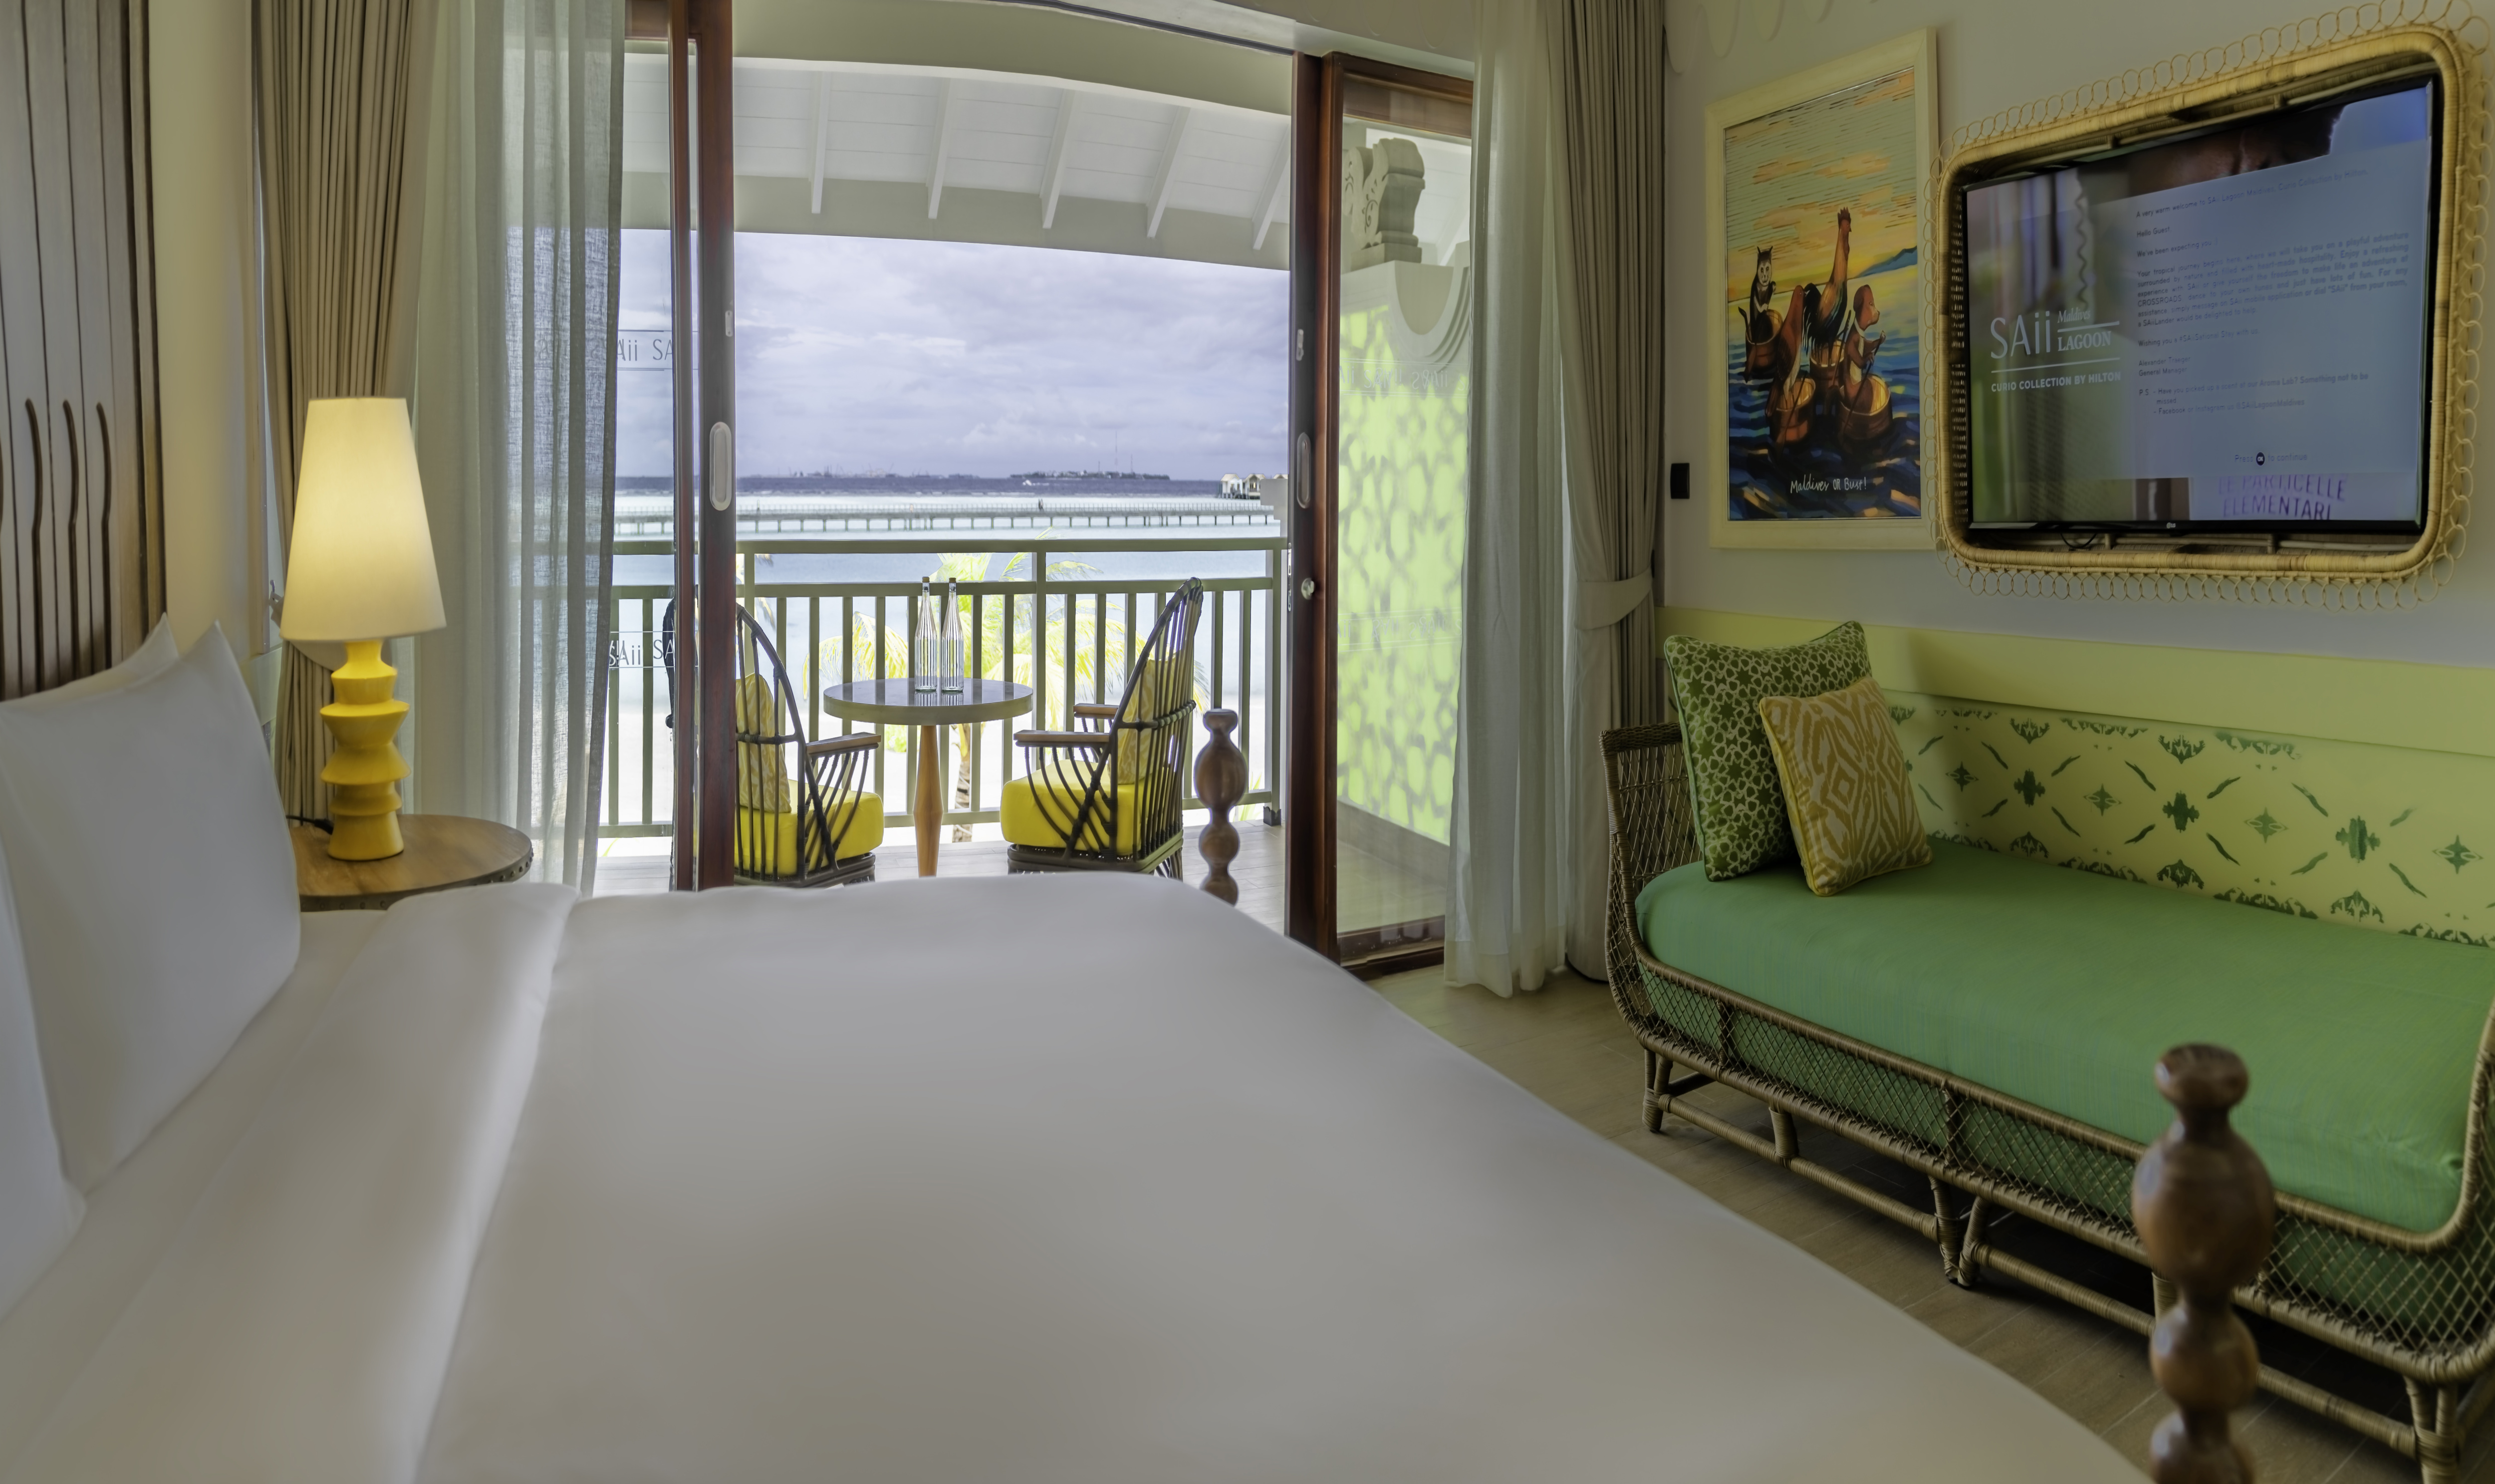 Bed and Living Area in a Guest Room with Ocean View from Balcony